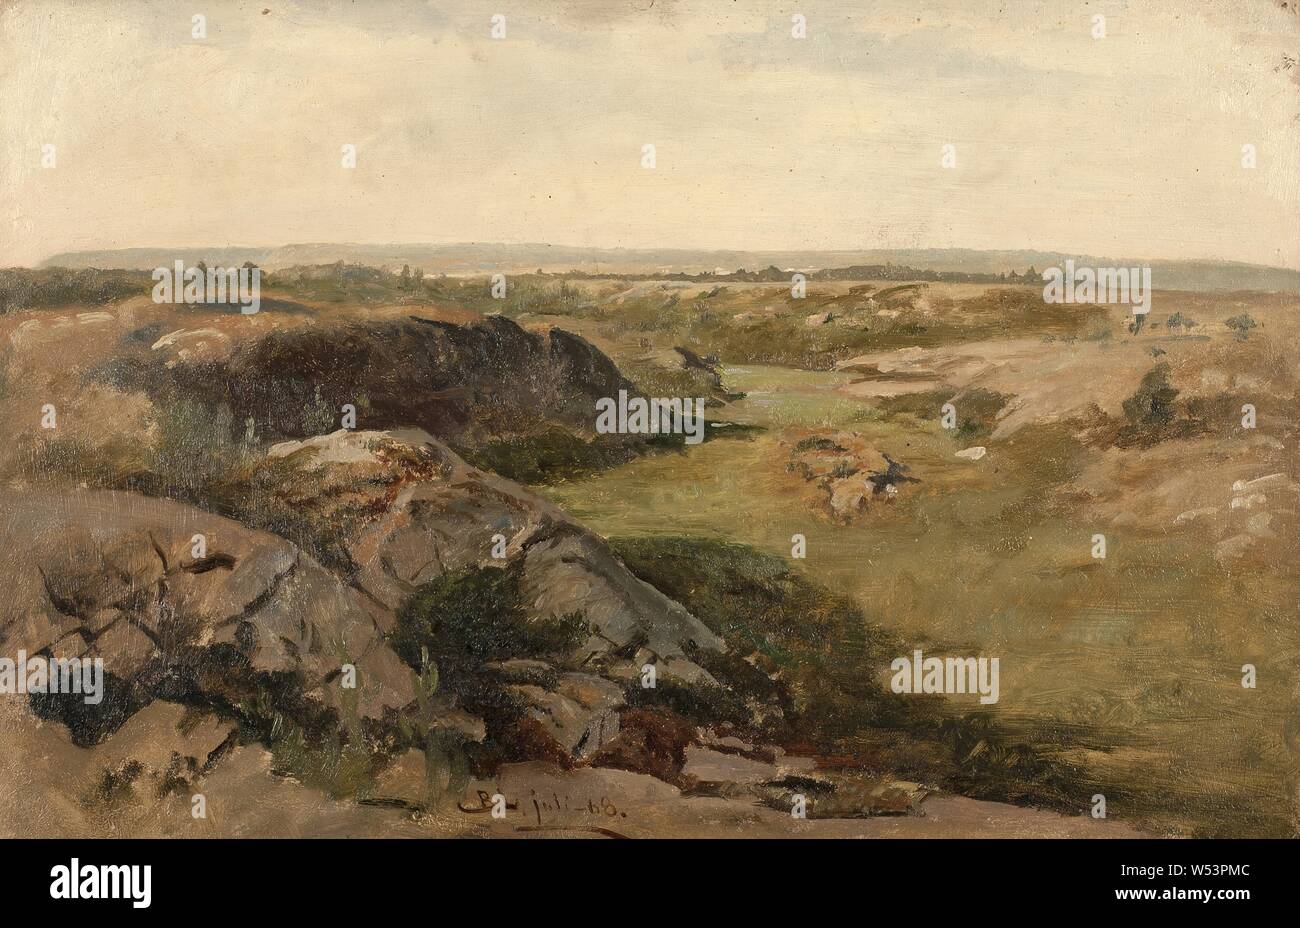 Berndt Lindholm, Undulating Country, Study, hilly landscape, painting, 1868, Oil on paper mounted on masonite, Height, 34.5 cm (13.5 inches), Width, 52 cm (20.4 inches), Signed, B L. July -68. Stock Photo